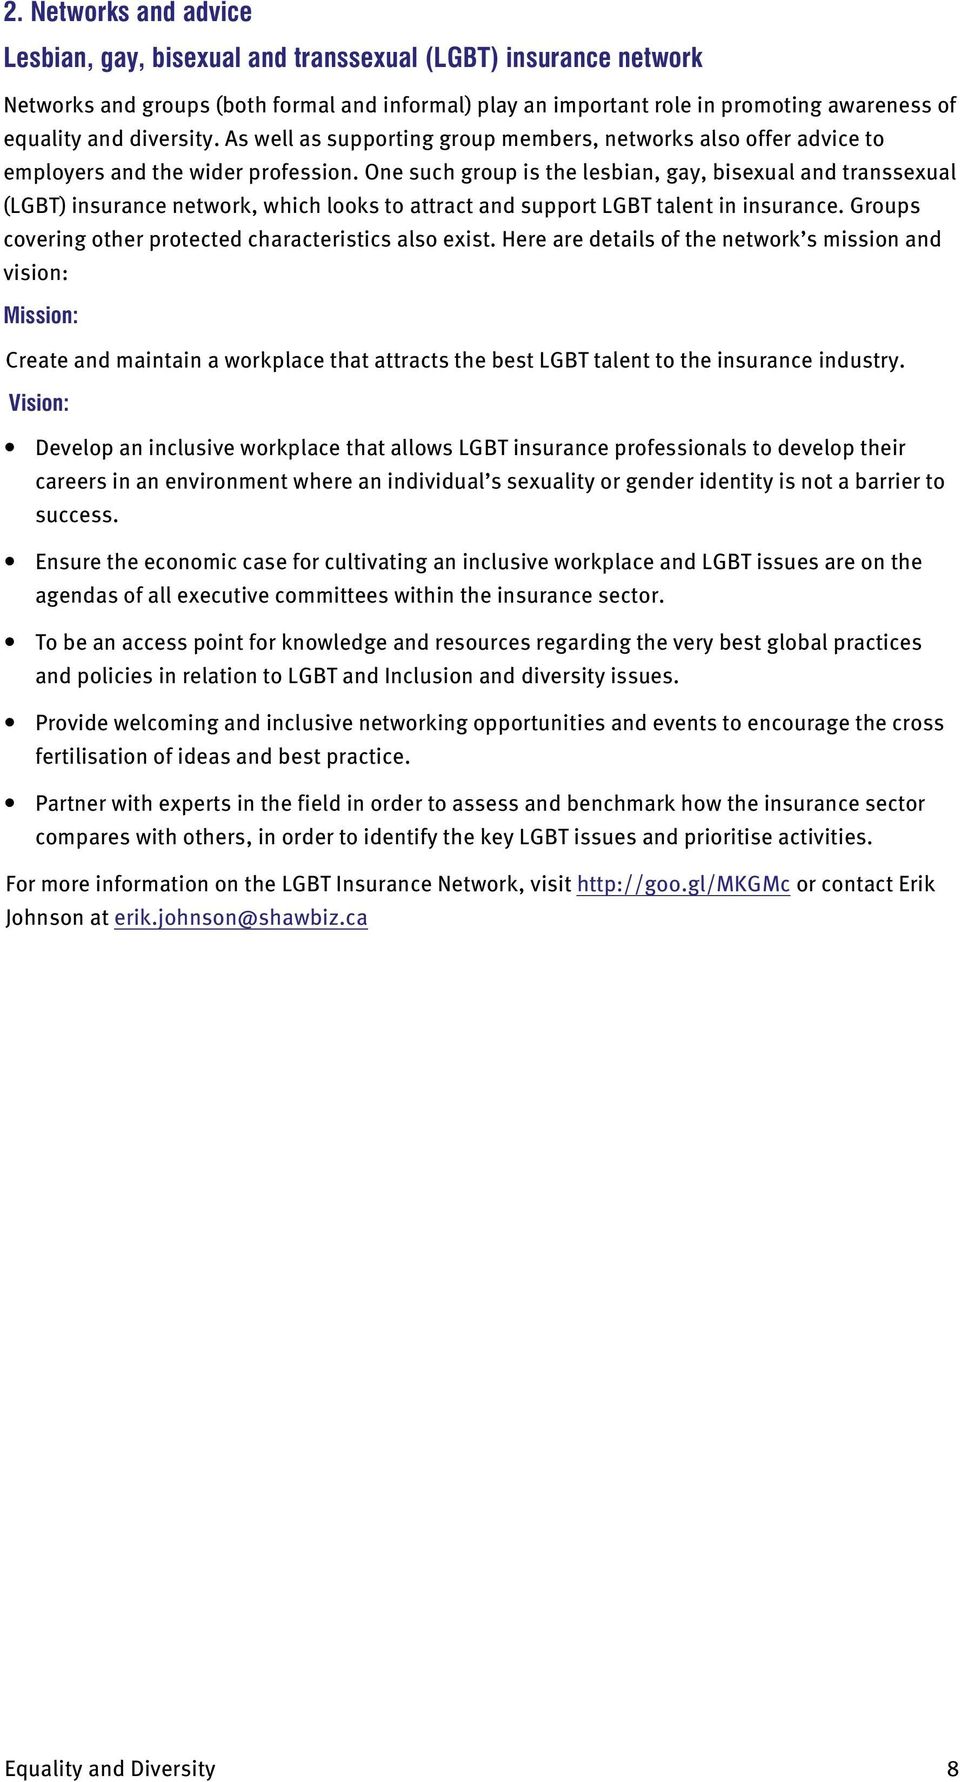 One such group is the lesbian, gay, bisexual and transsexual (LGBT) insurance network, which looks to attract and support LGBT talent in insurance.